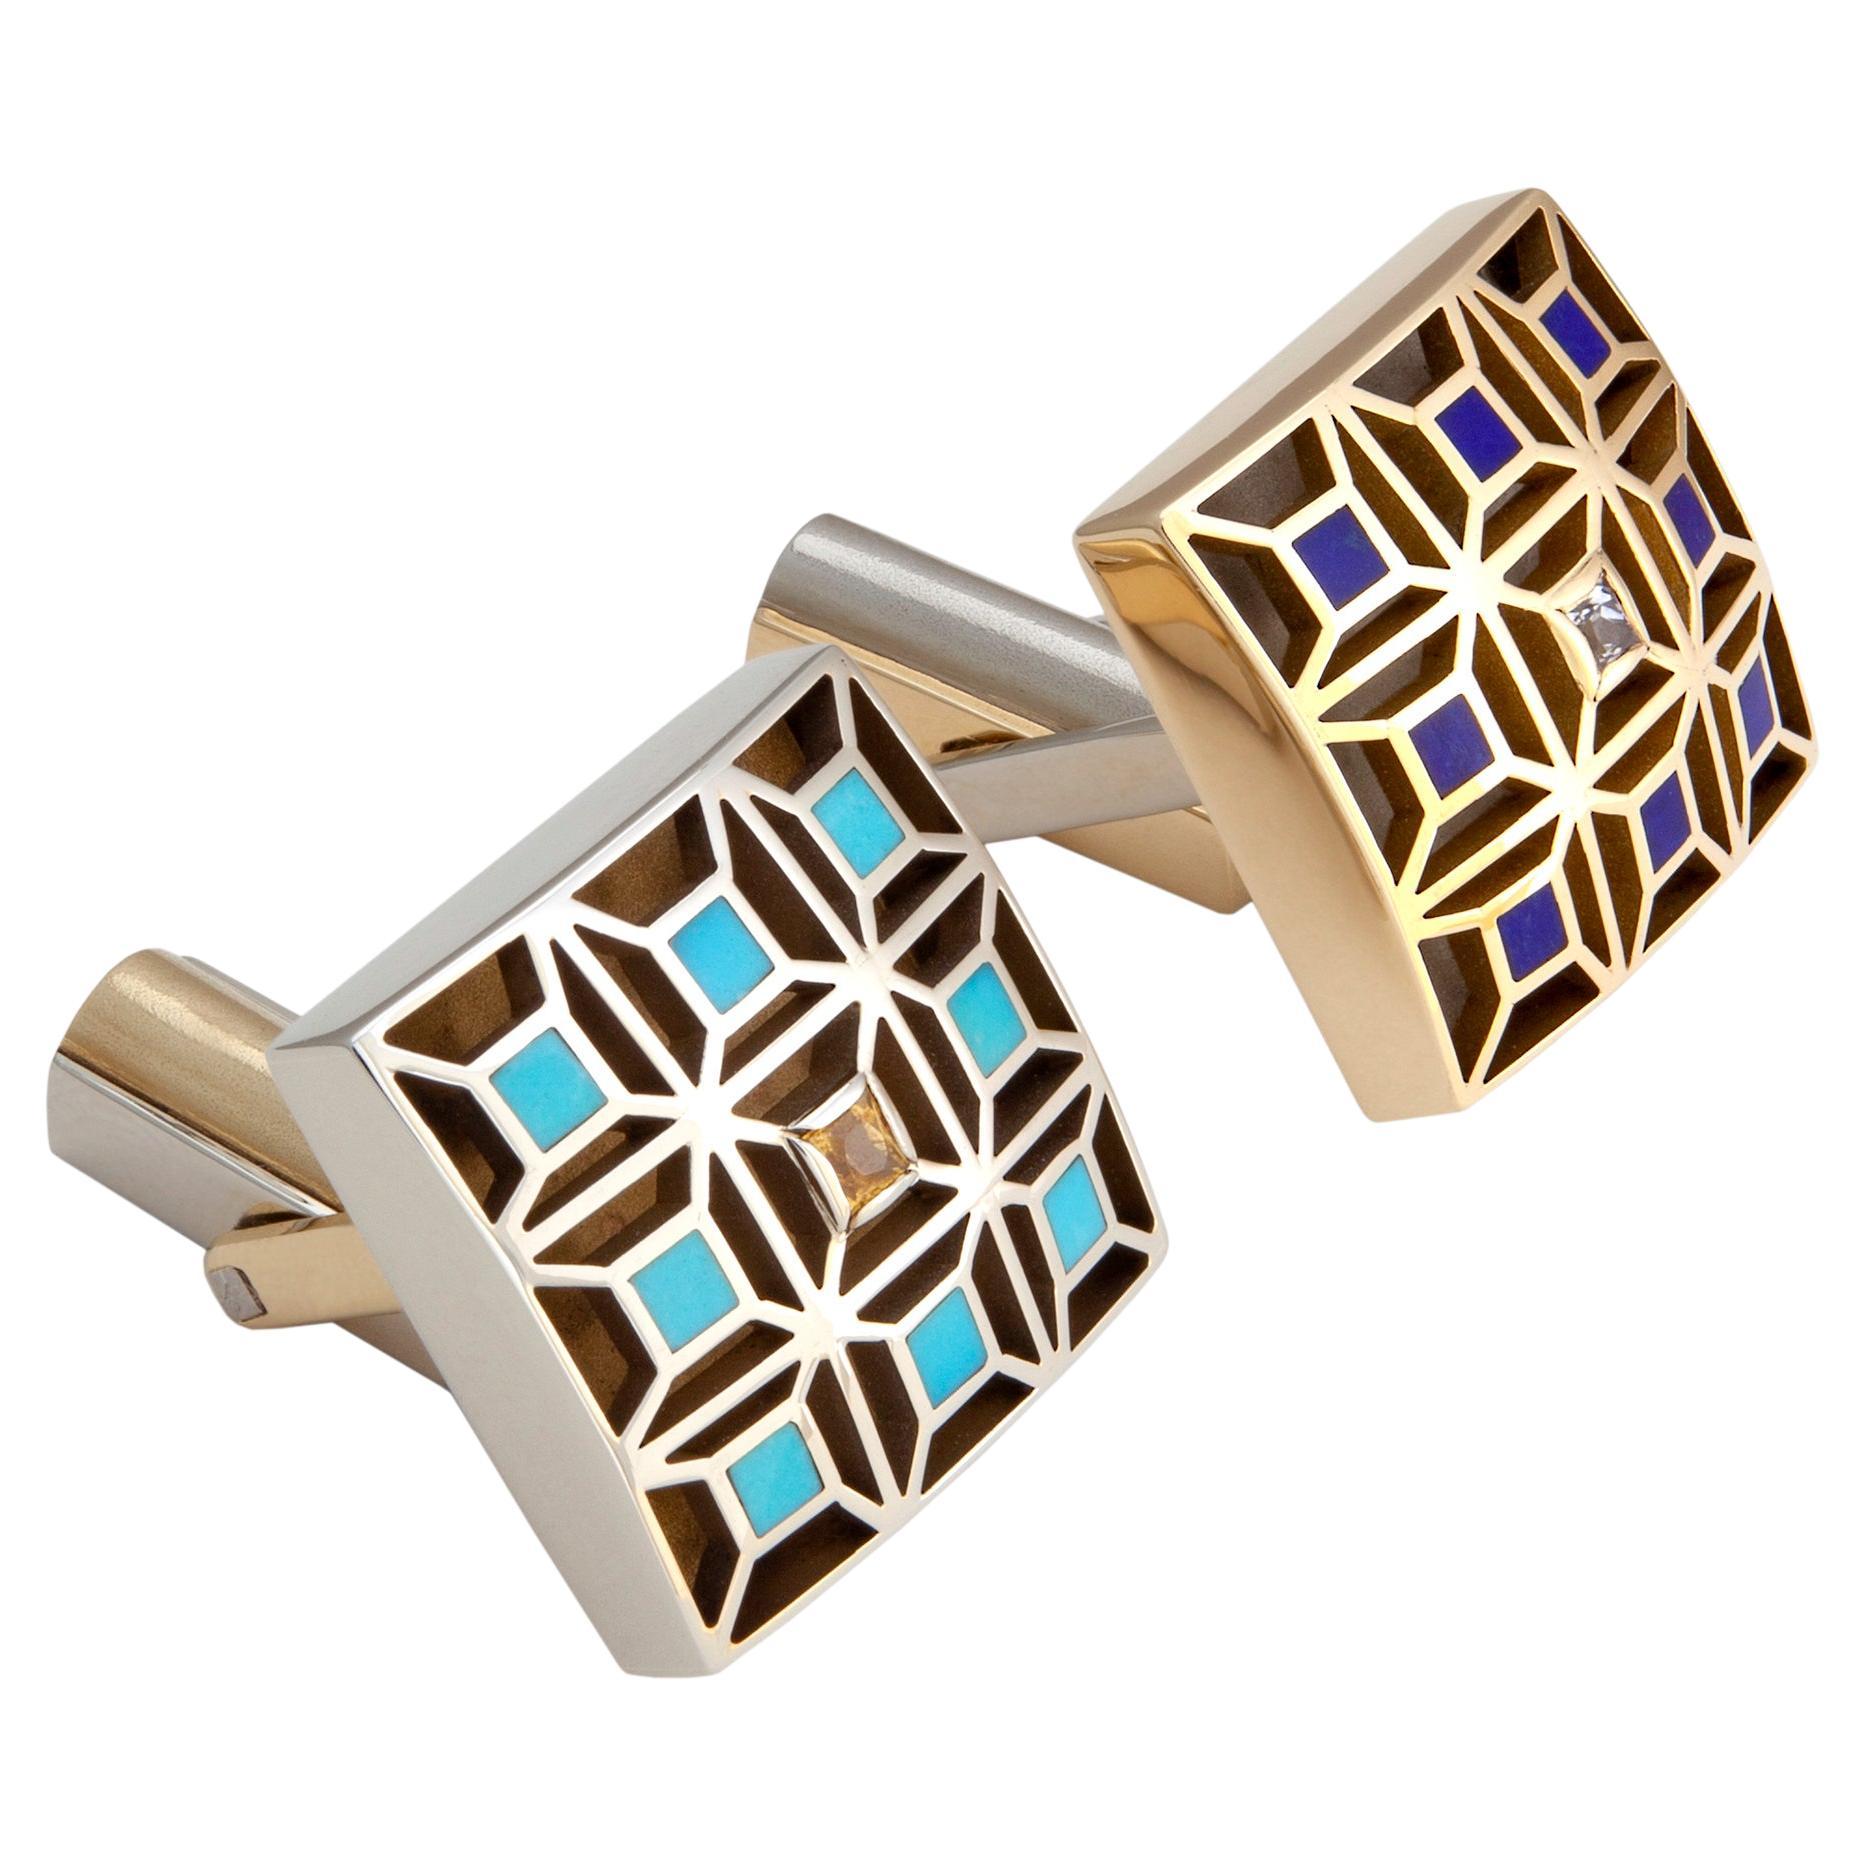 Valerie Jo Coulson, Gold Cufflinks with Lapis Lazuli, Turquoise, Sapphires For Sale